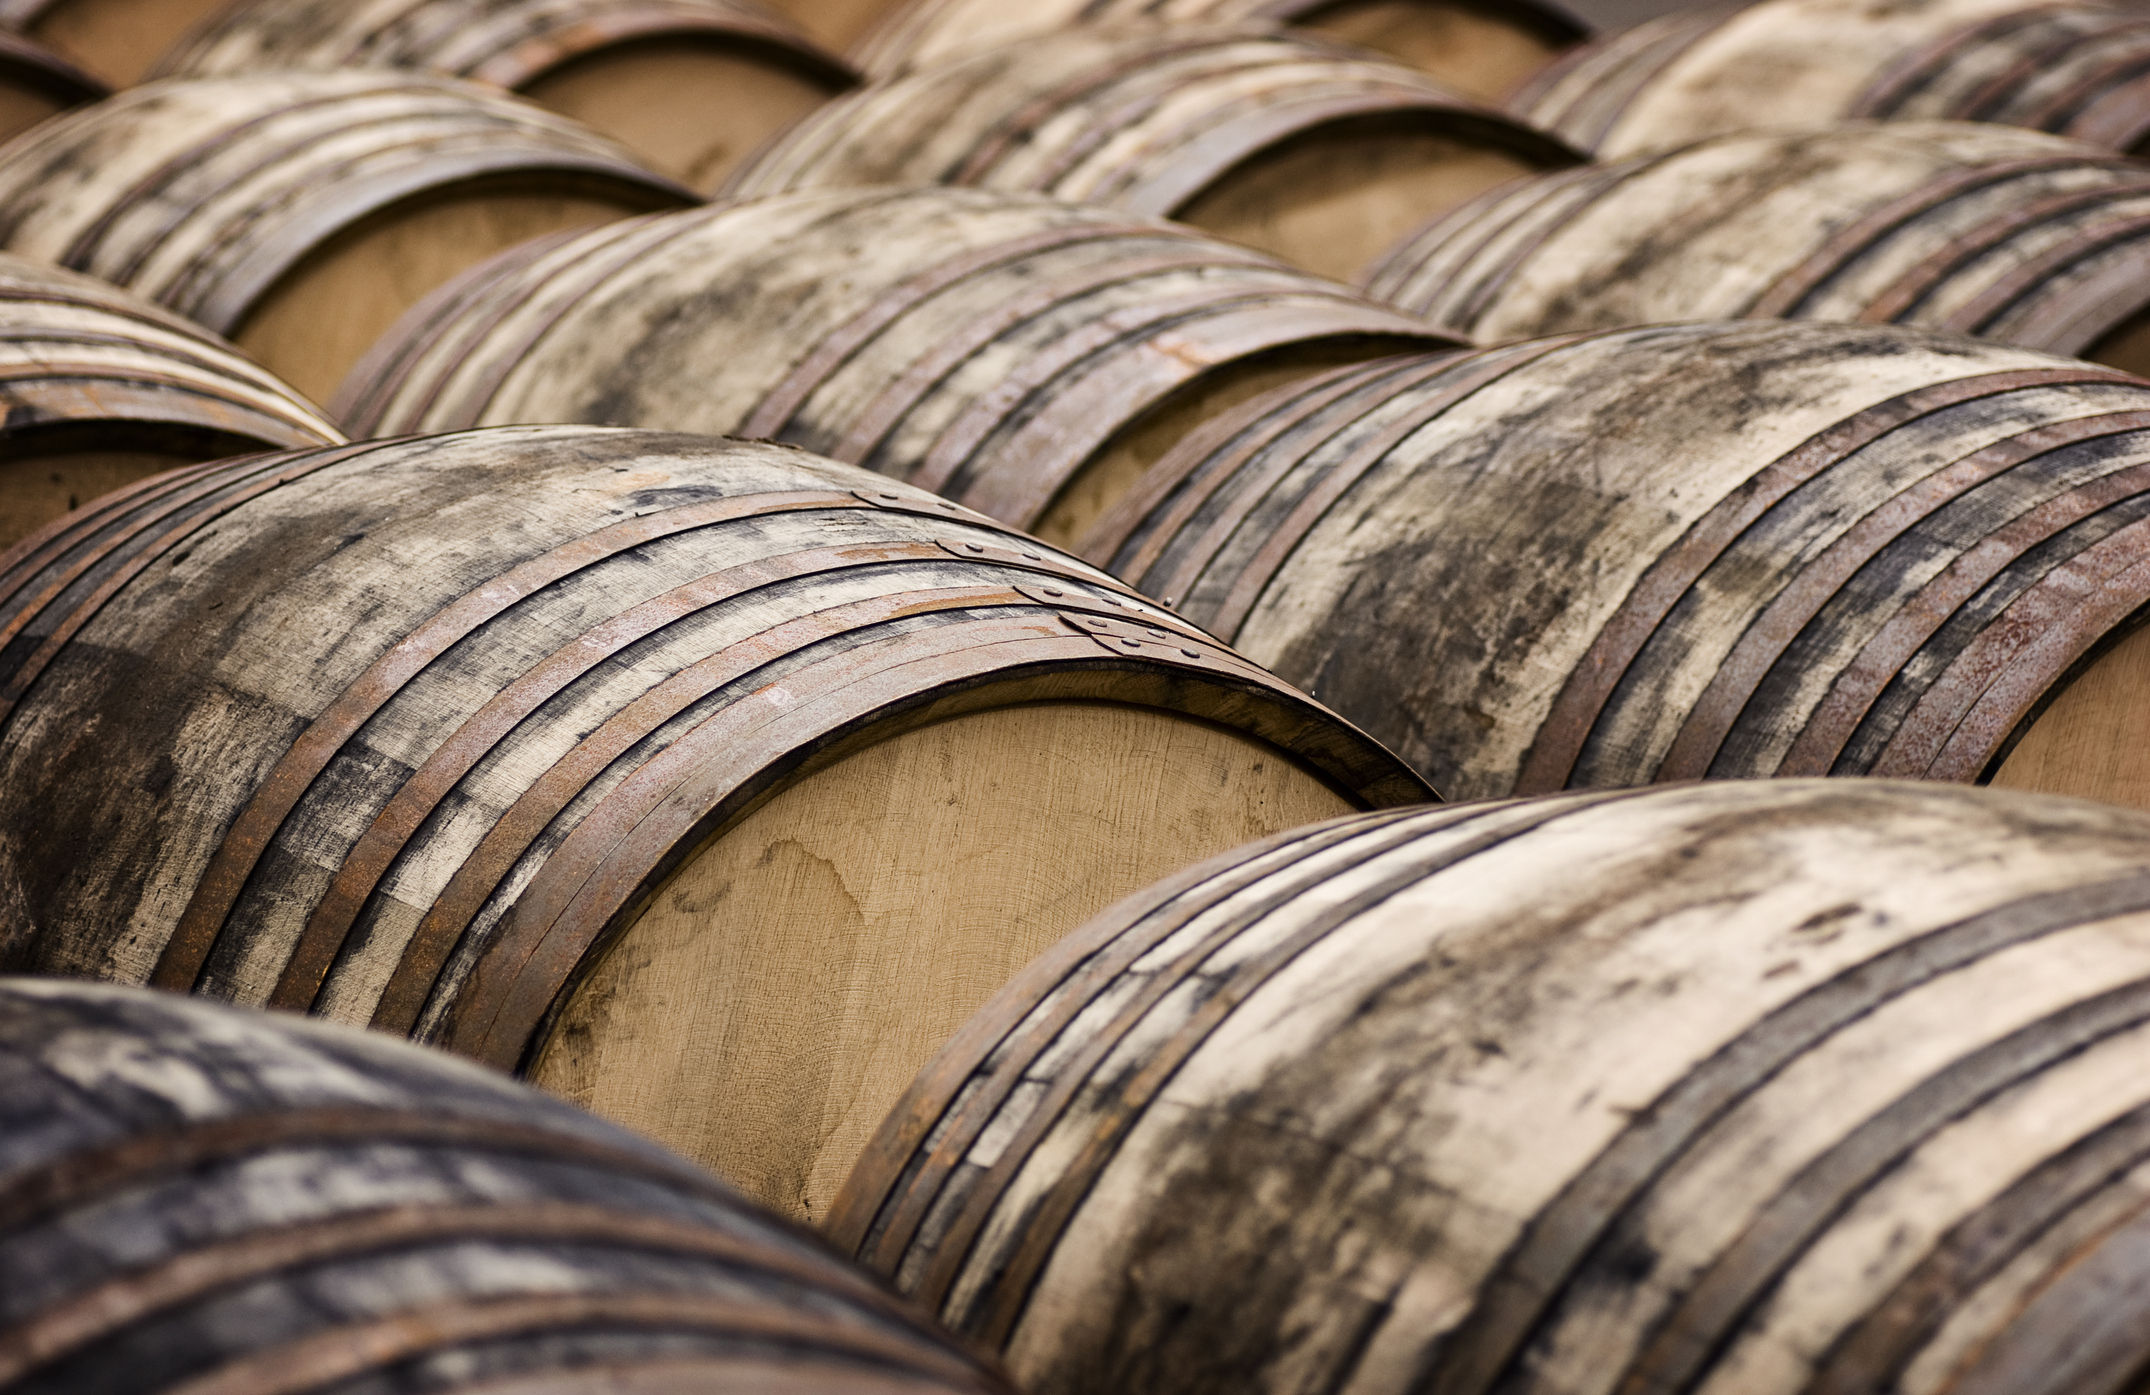 Distillers explain why unusual cask finishes are the next big trend in whisky